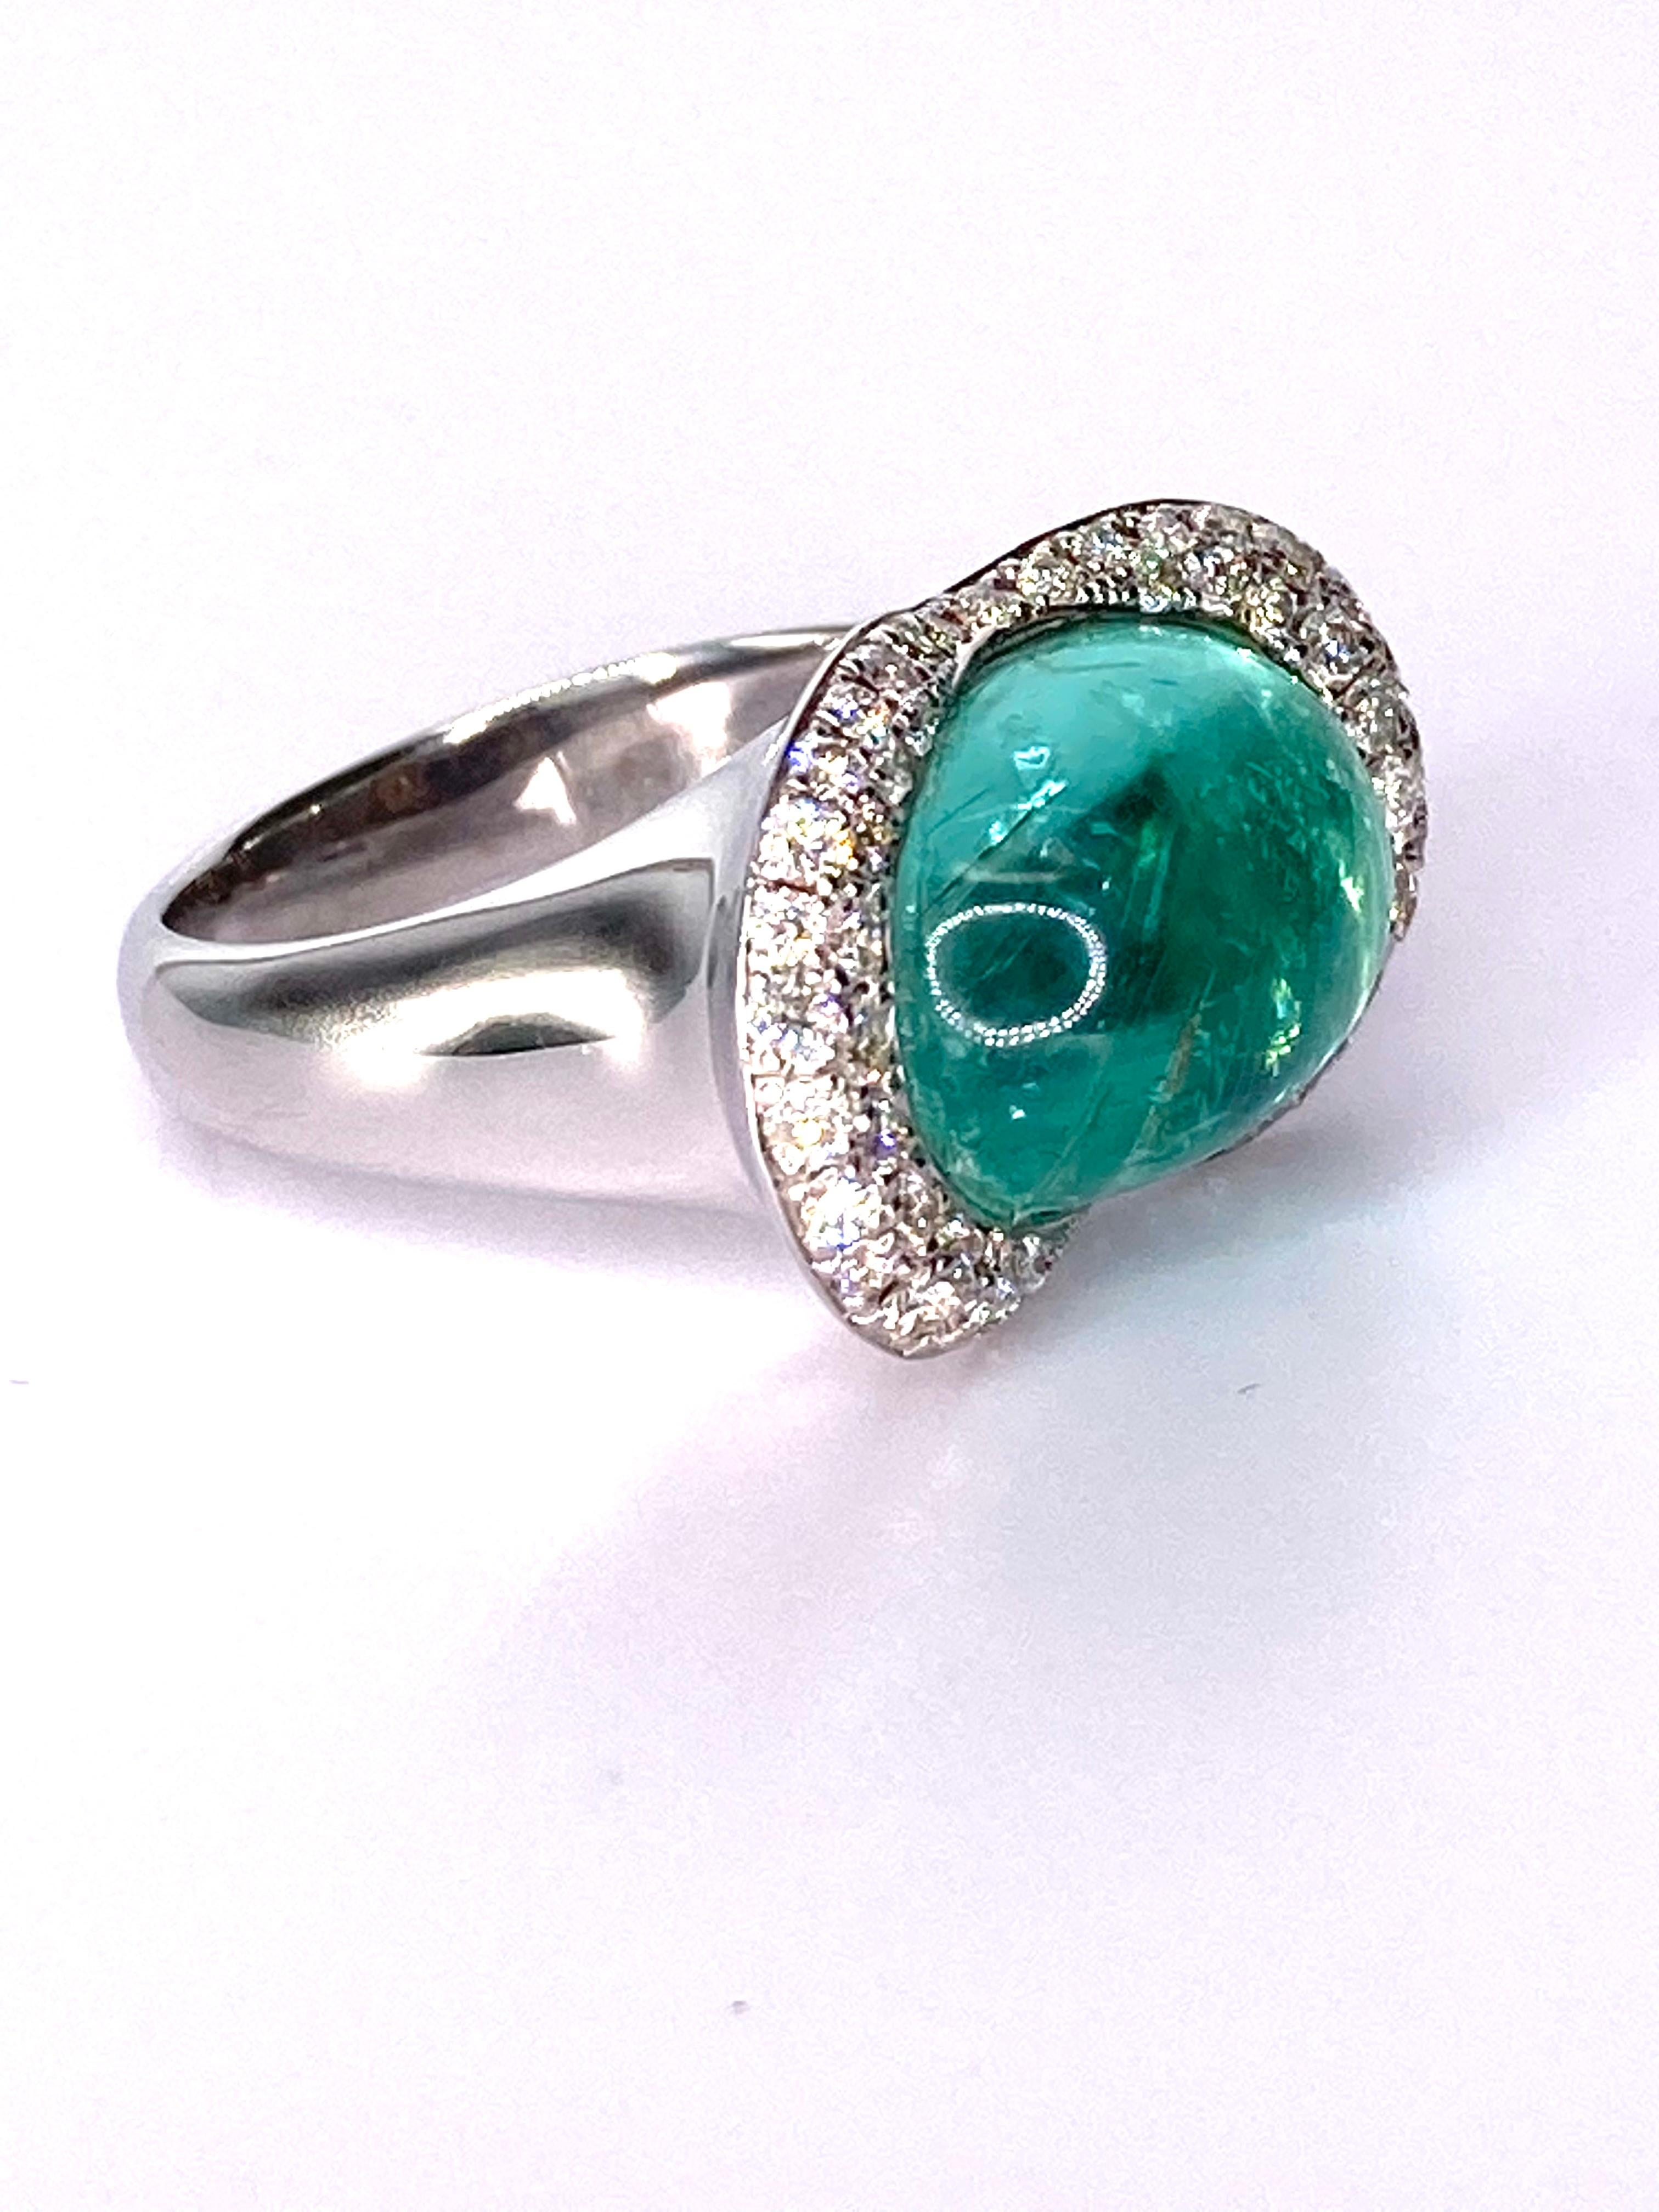 7.8 Carat Paraiba Tourmaline Cabochon and Diamond Ring In New Condition For Sale In Los Angeles, CA